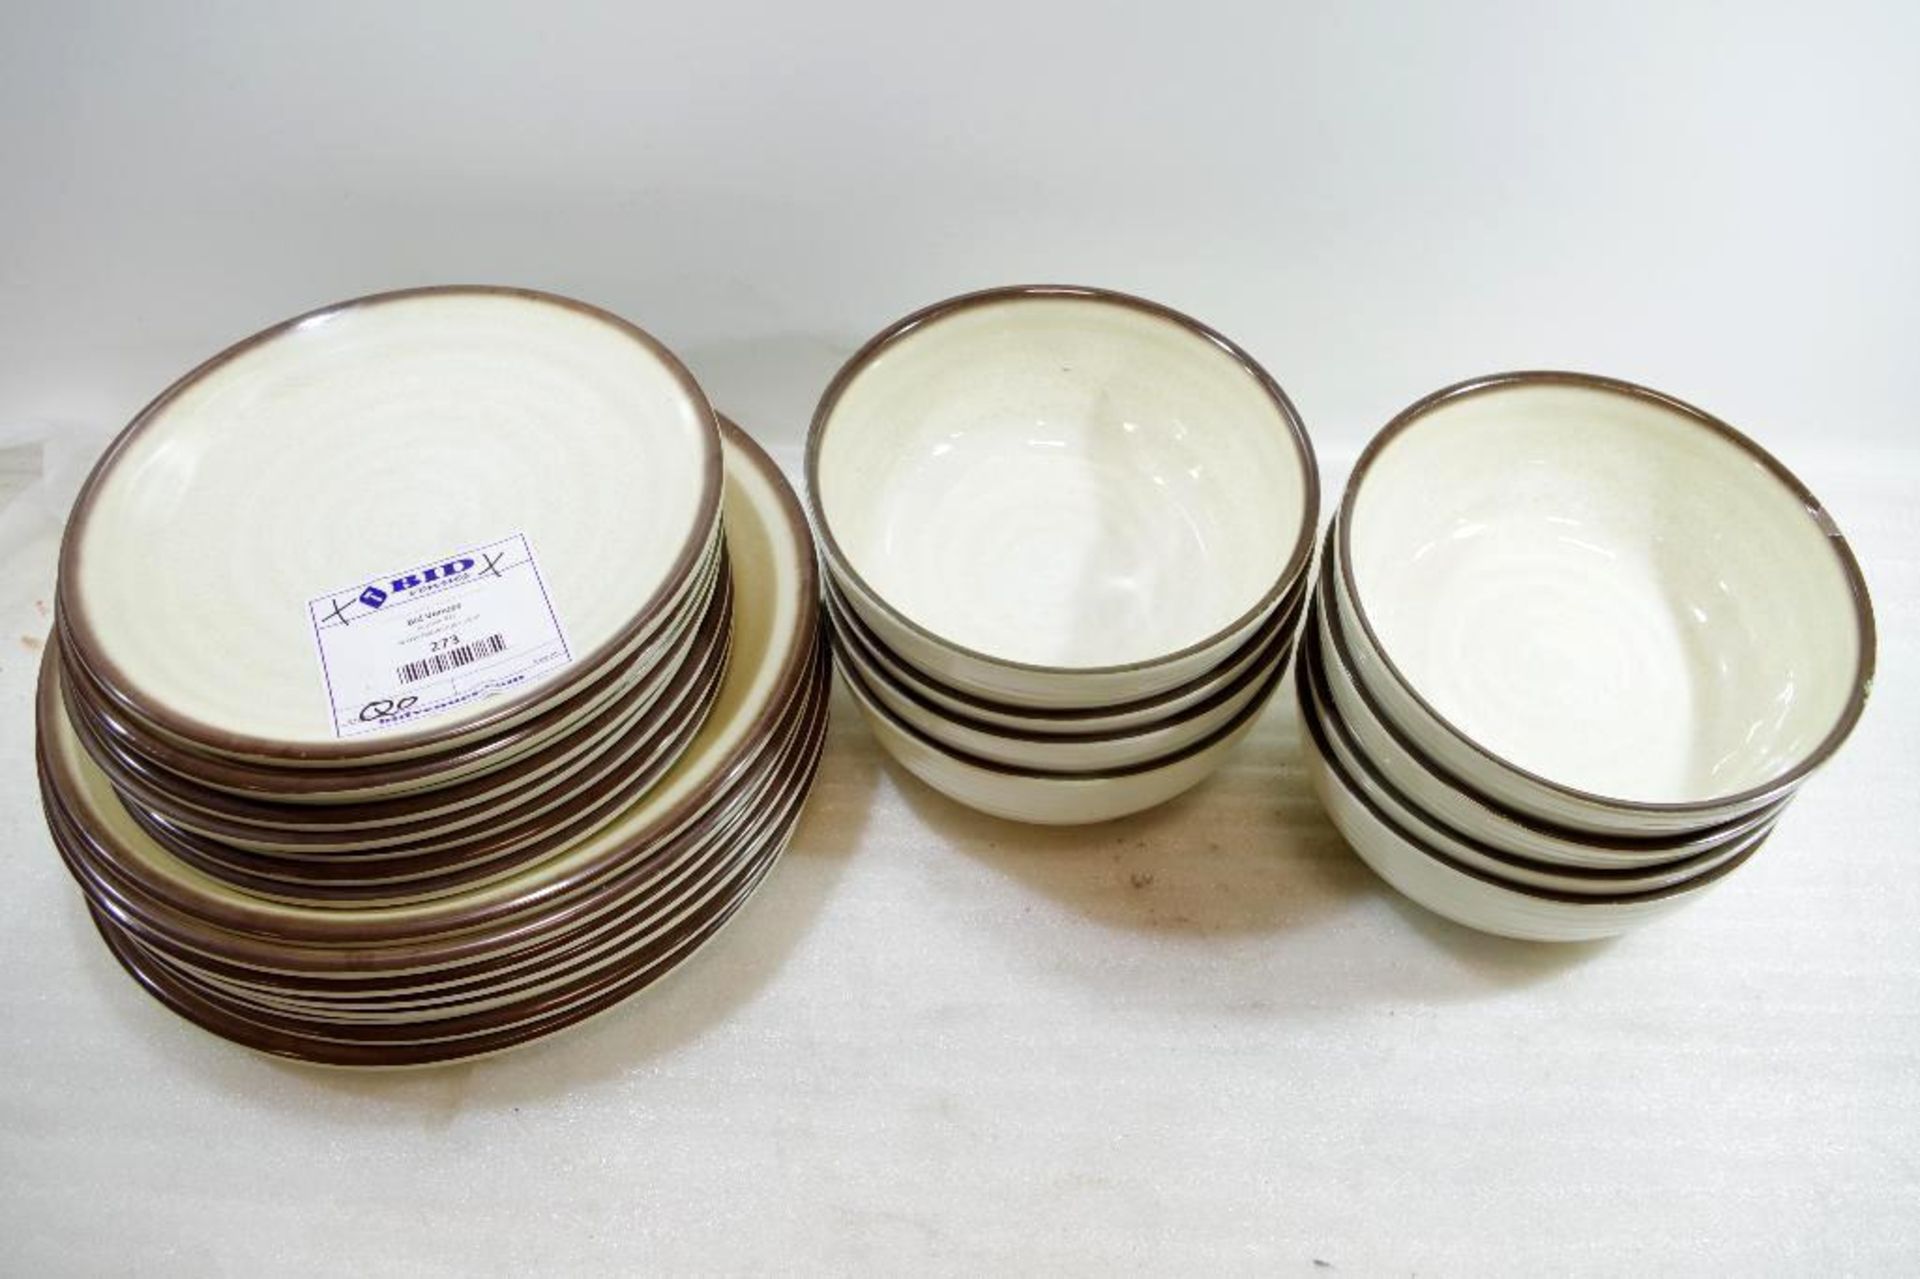 8-Piece Melamine Dinnerware Set (Store Return, One or More Chipped) - Image 2 of 3